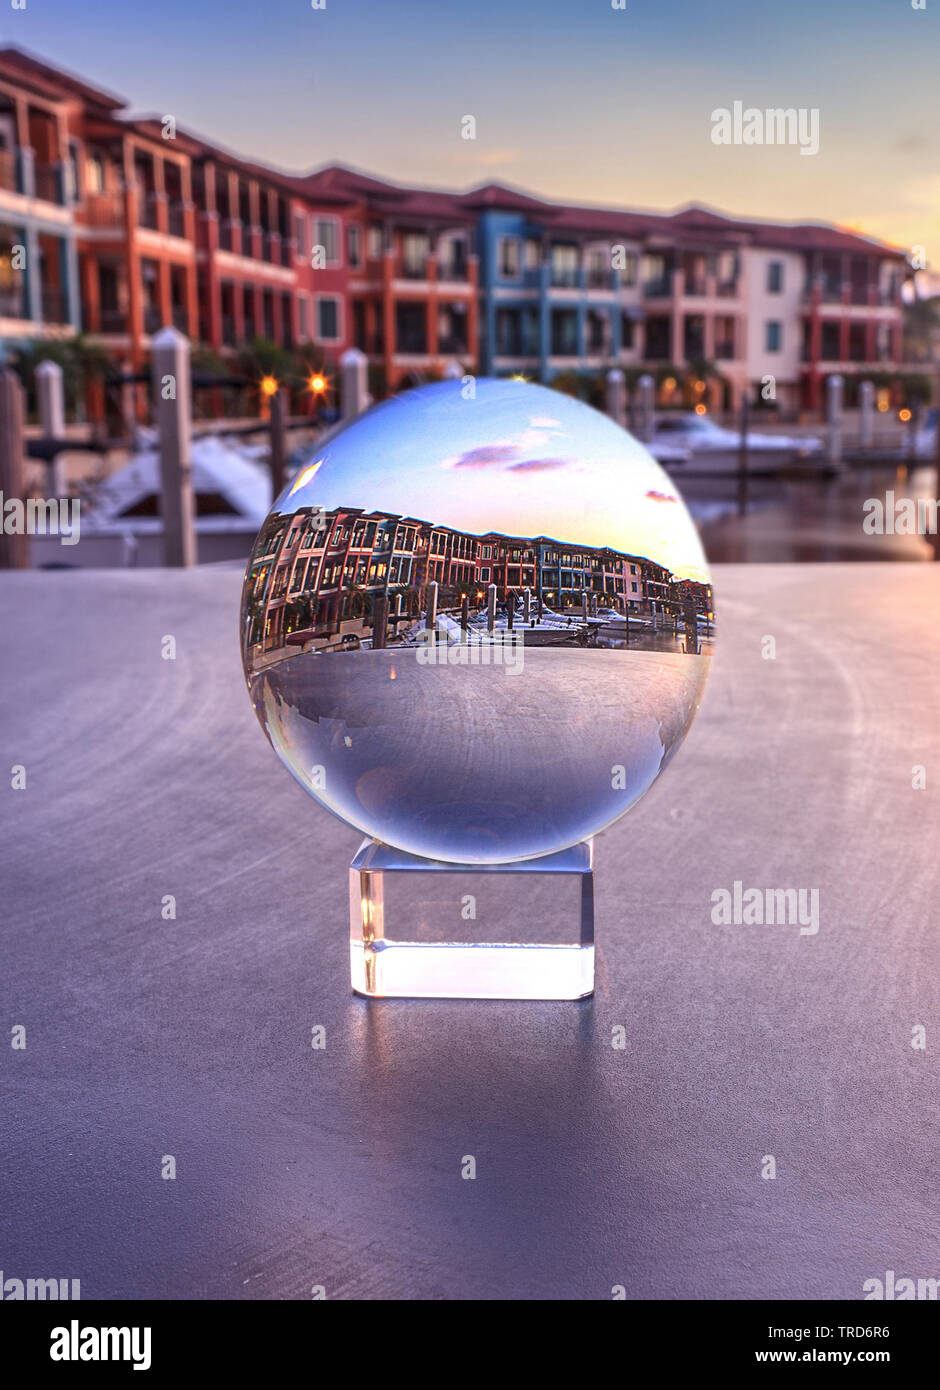 Naples, Florida, USA – May 29, 2019: Crystal ball with colorful buildings and a harbor of boats along a waterway in Naples, Florida inside. Stock Photo